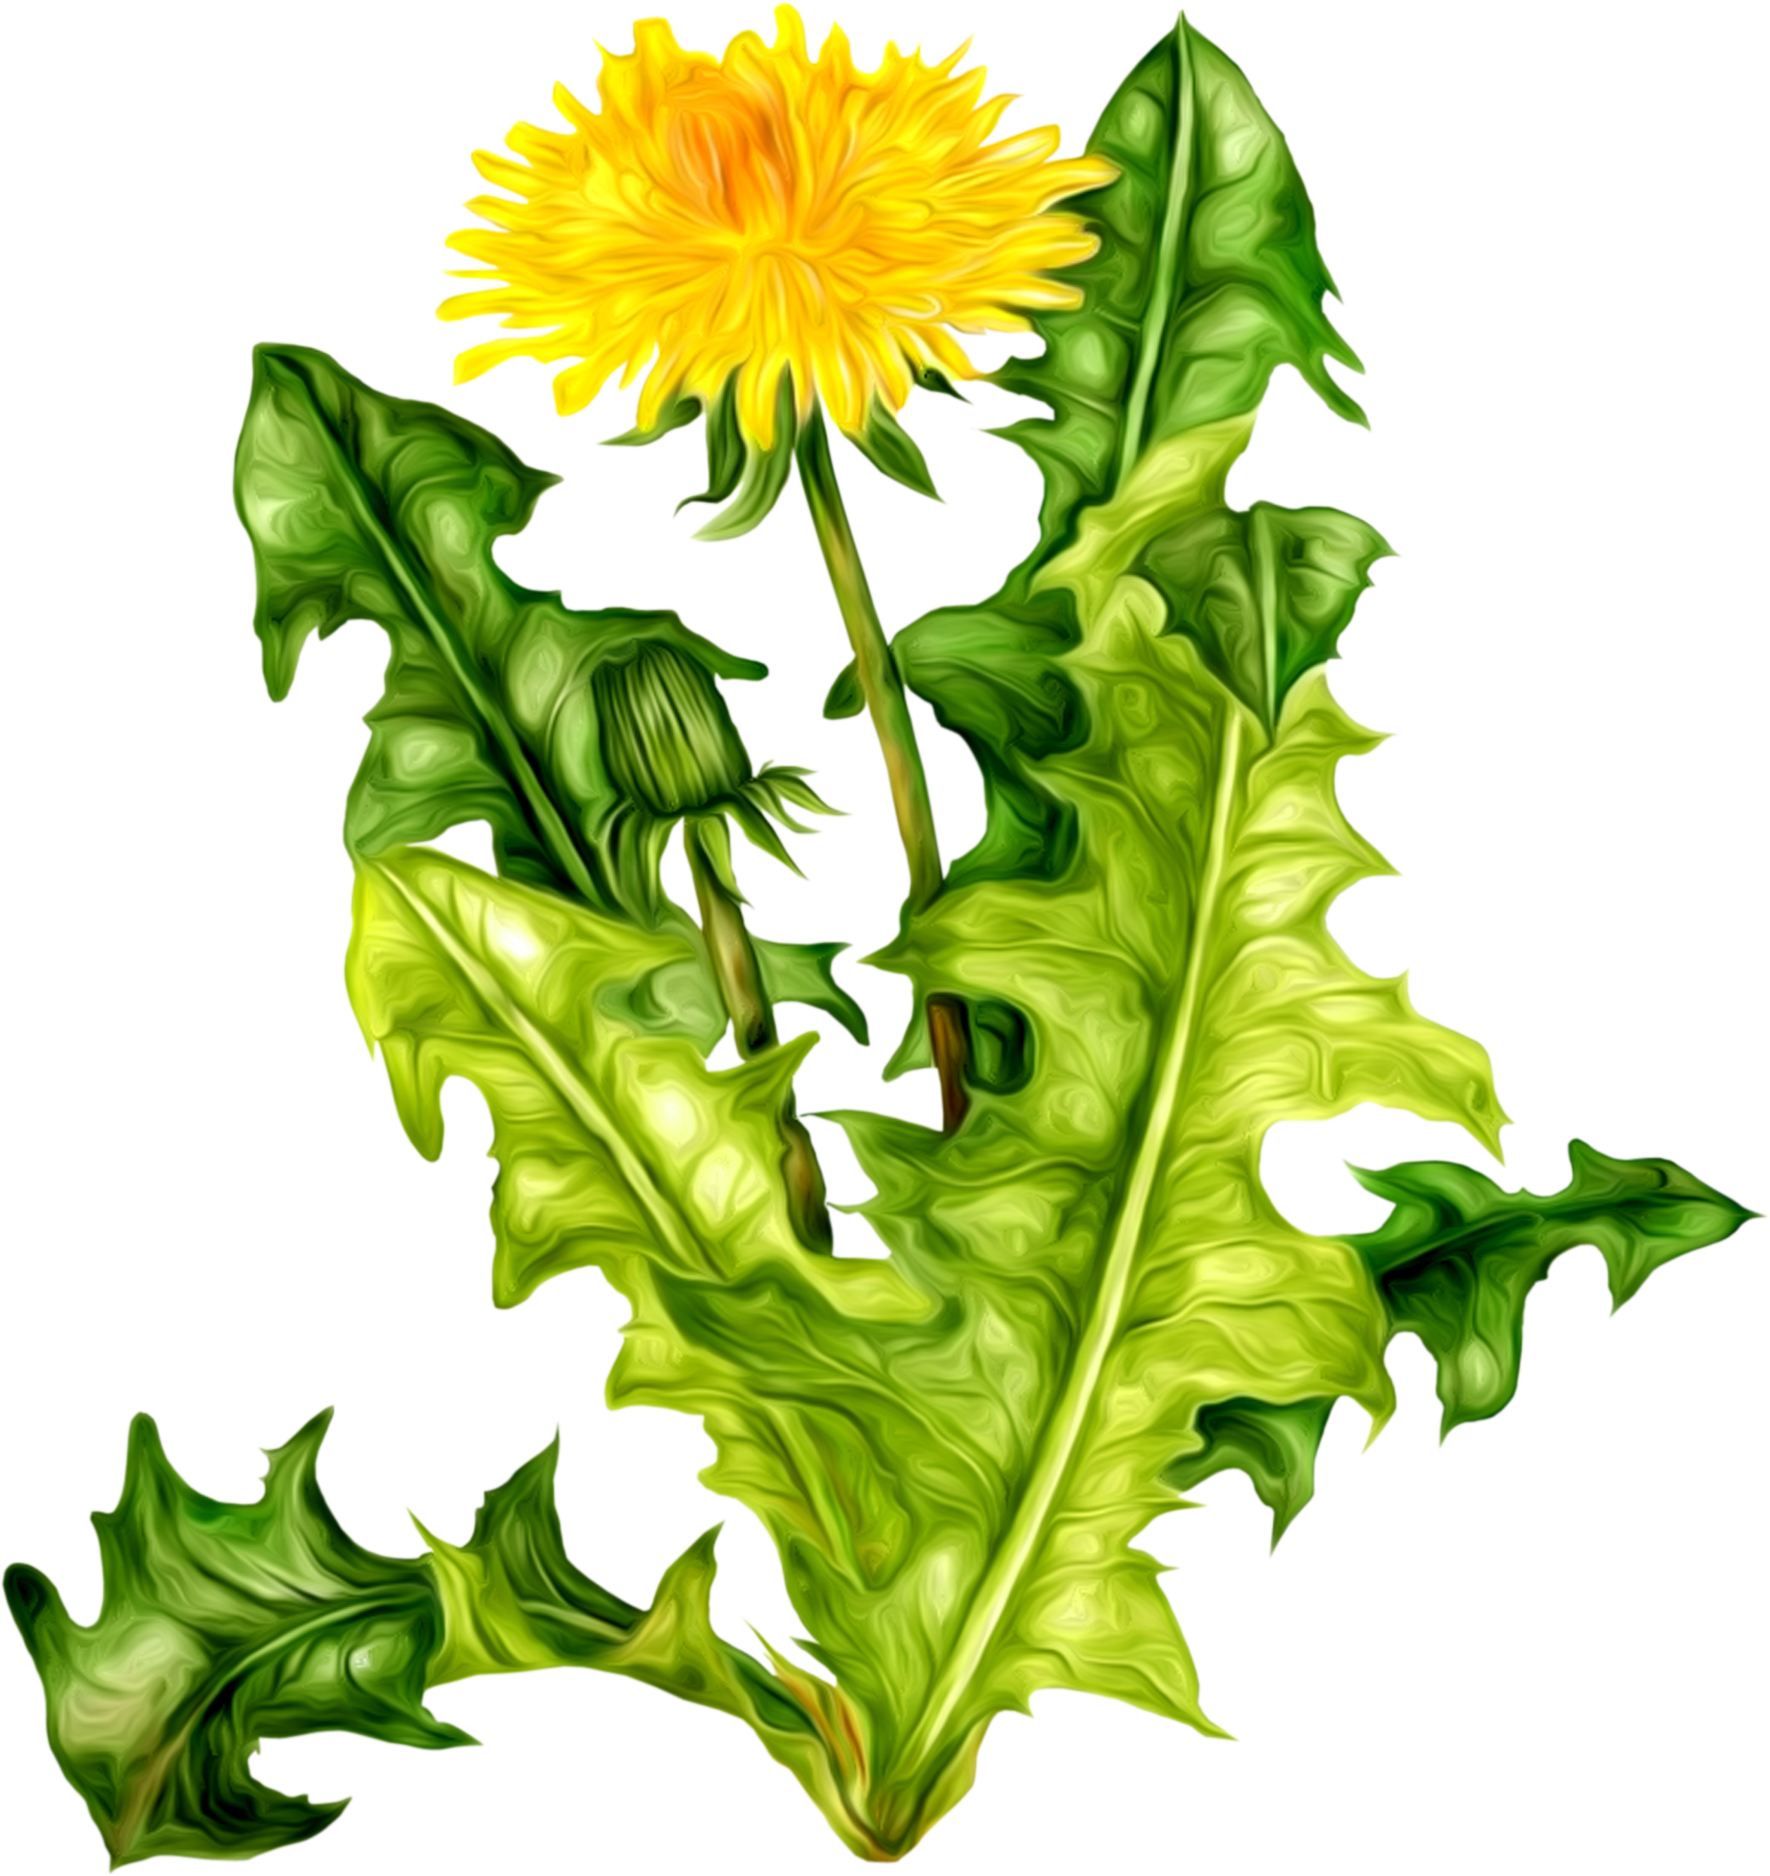 A Dandelion With Leaves